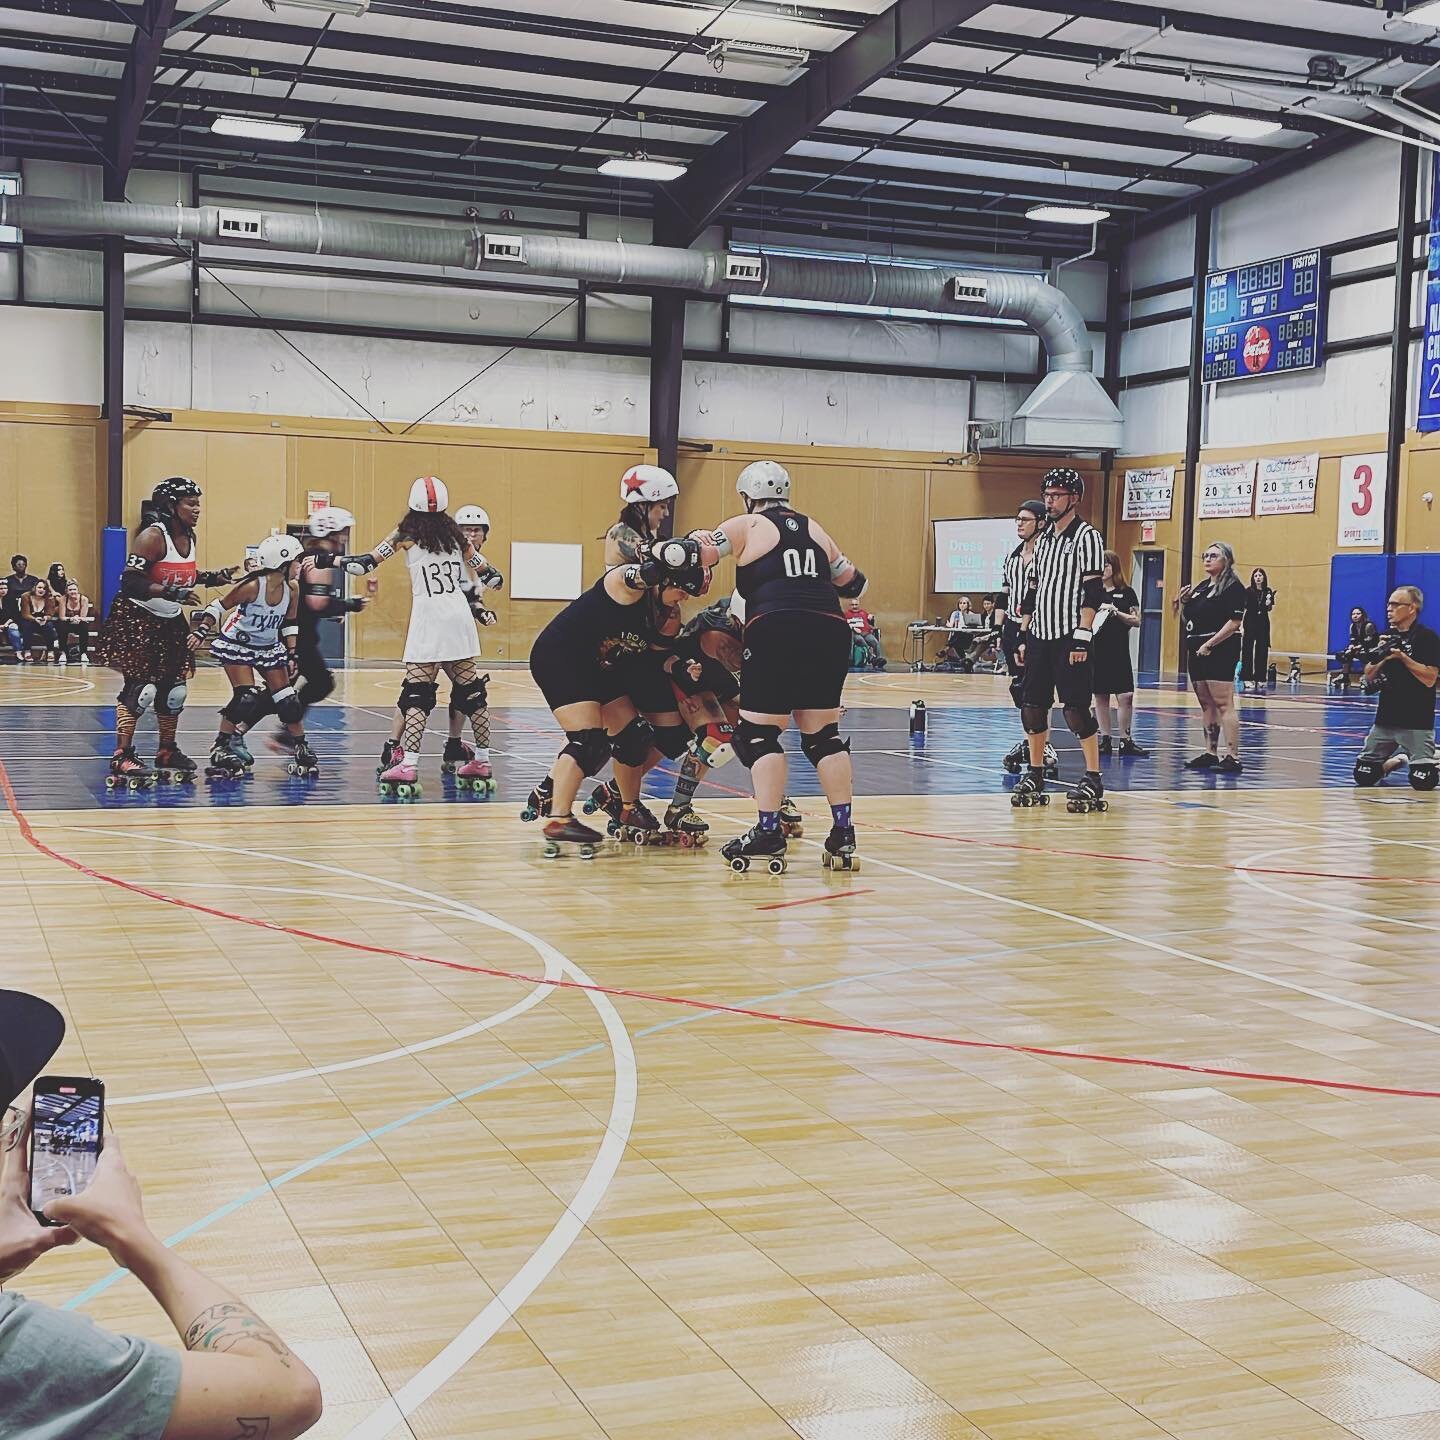 Derby! Inside. In the A/C! First time back since 2020. omigod. @austinkimovement is happy to be sponsoring @texasrollergirls. Come check them out @austinsportscenter this season! #texasrollergirls #derbyatx #texasrollergirlsforever #thingstodoinausti